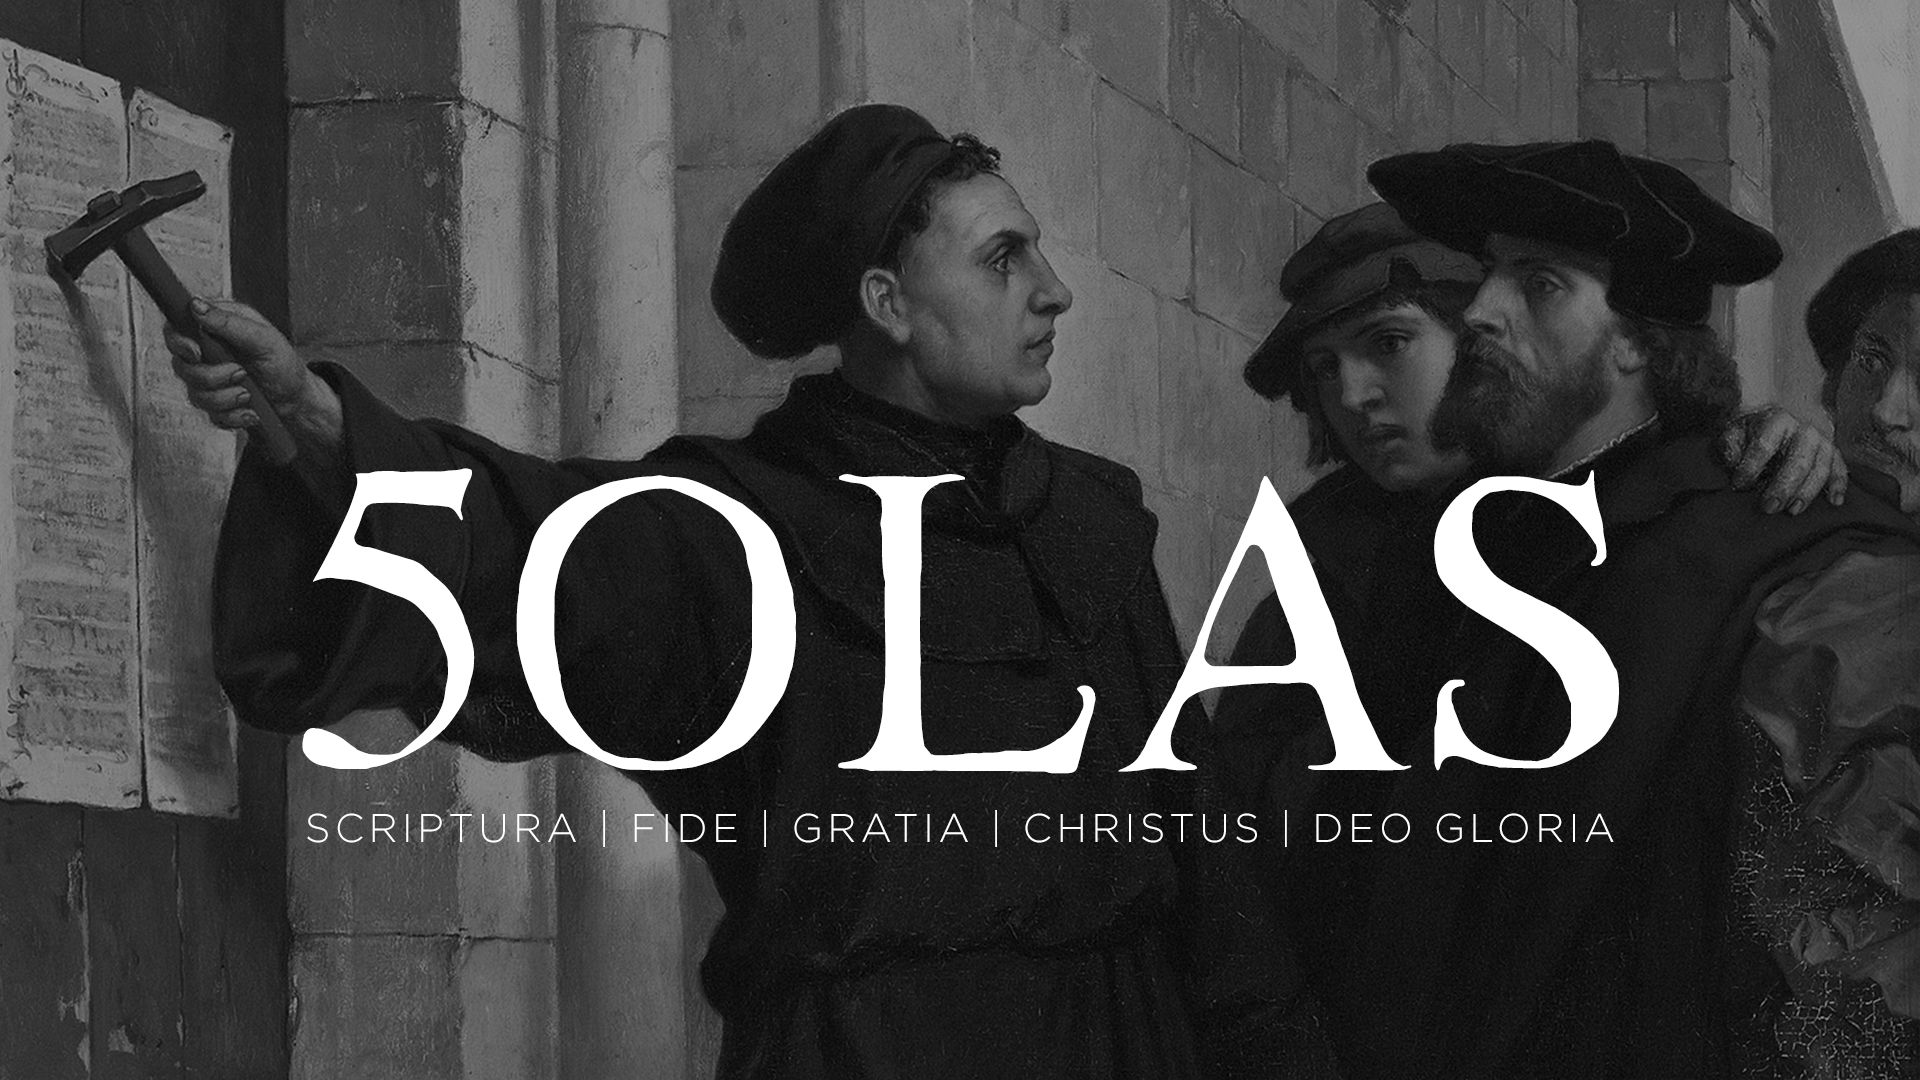 PODCAST SESSION 4: THE SOLAS OF THE REFORMATION